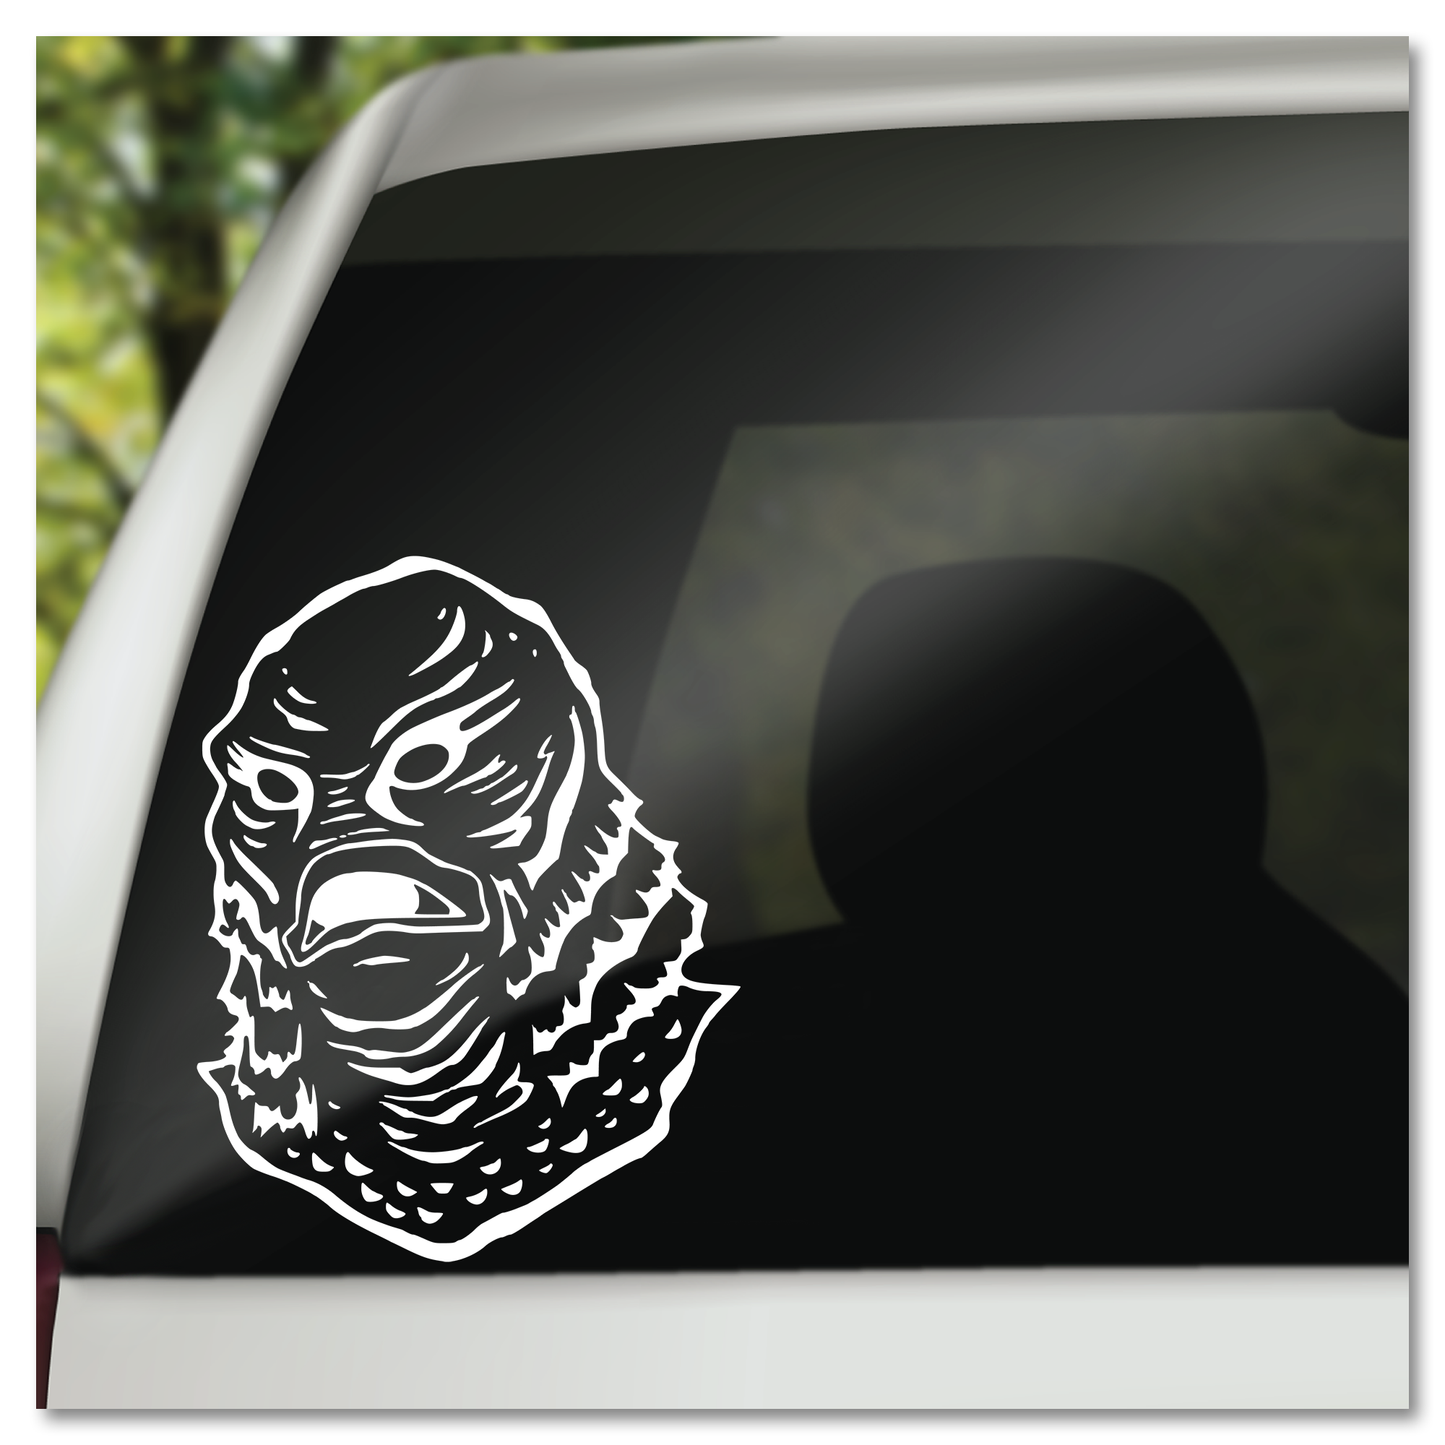 Creature from the Black Lagoon Classic Universal Horror Monster Vinyl Decal Sticker